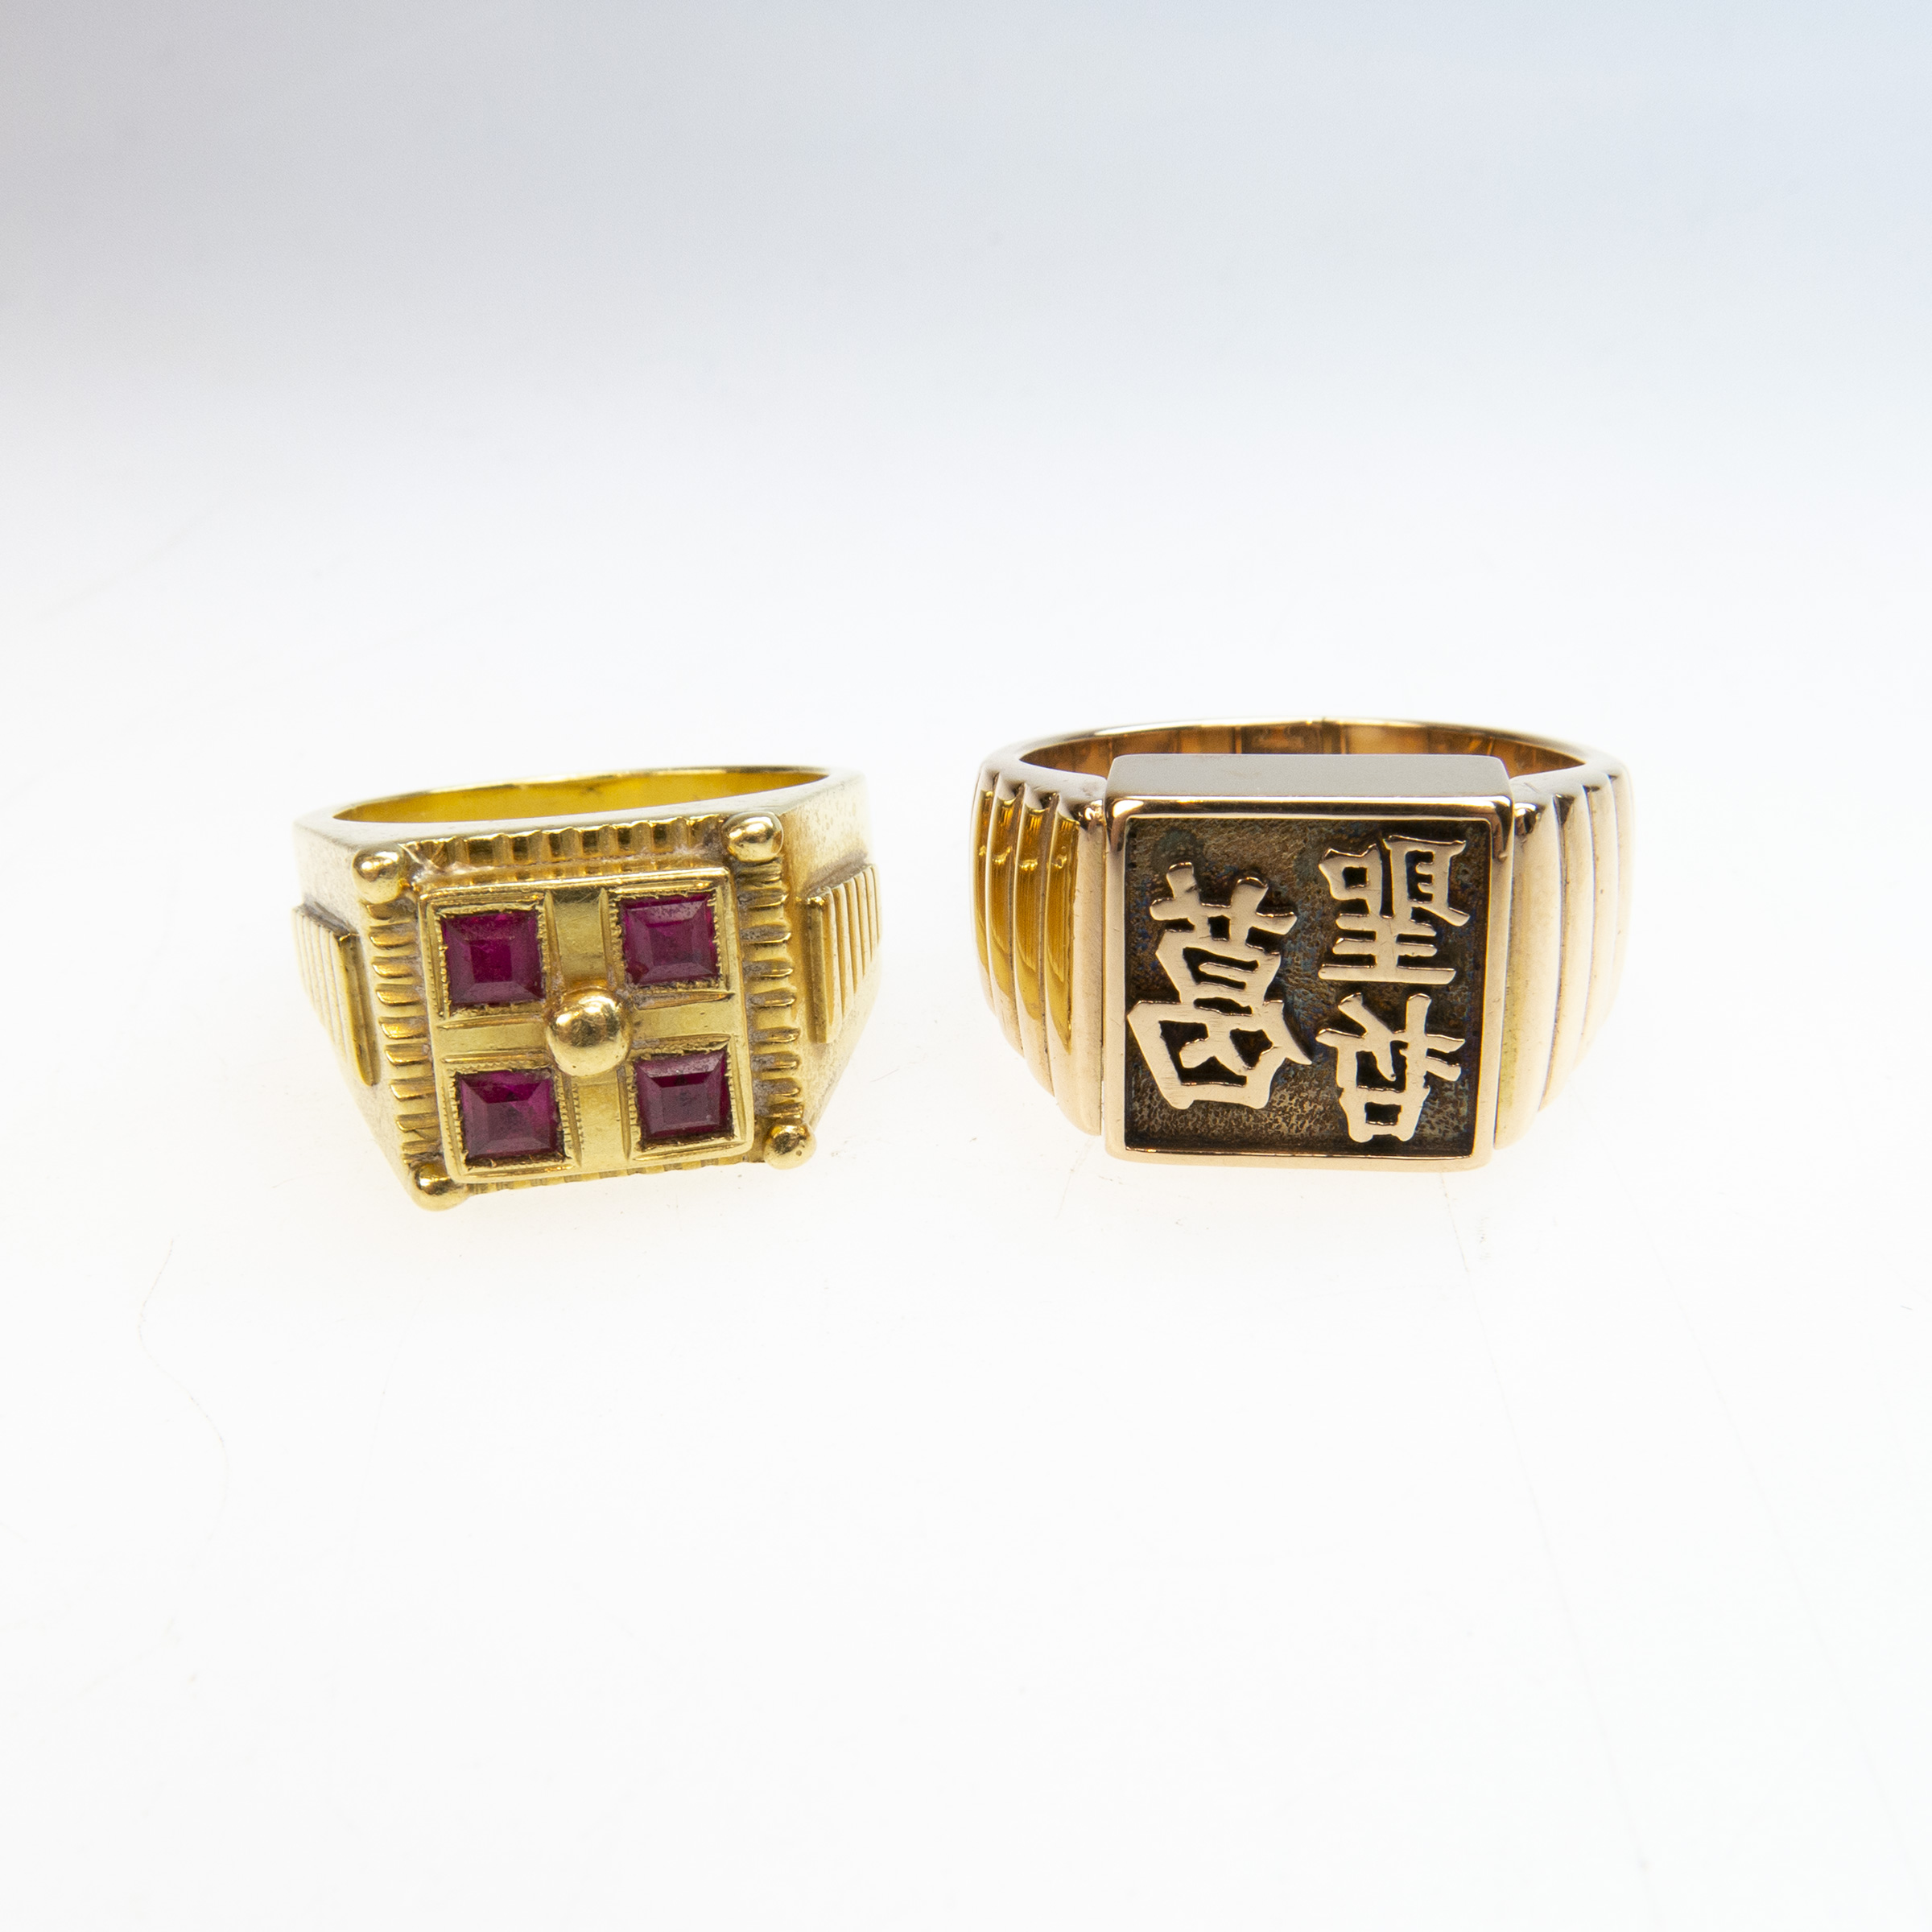 1 x 14k and 1 x 18k Yellow Gold Men's Rings